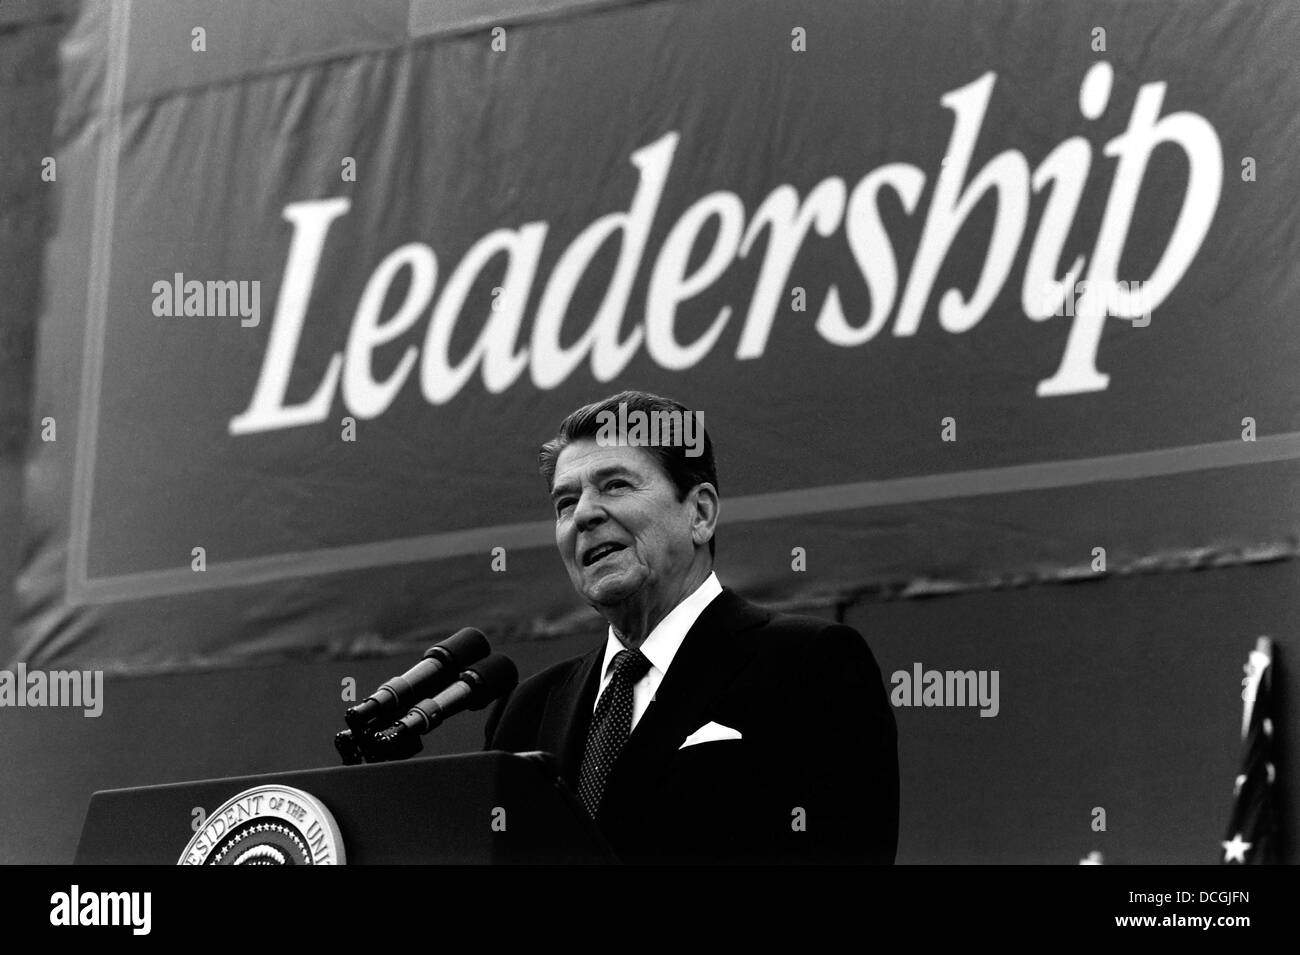 Digitally restored American history photo of President Ronald Reagan giving a campaign speech. Stock Photo